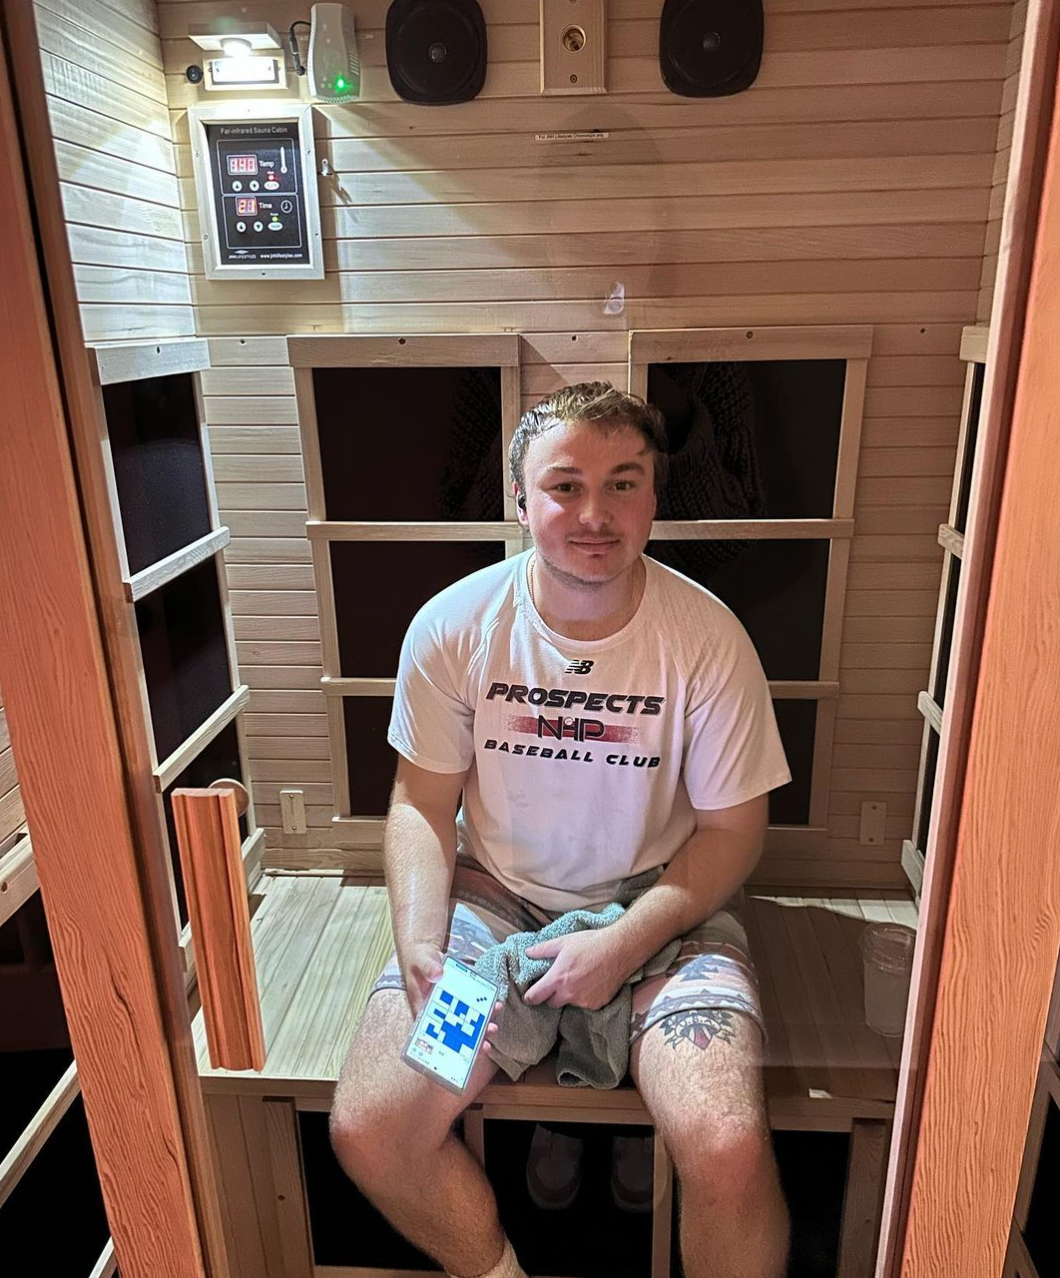 Buy 1 Sauna Session Get One FREE!